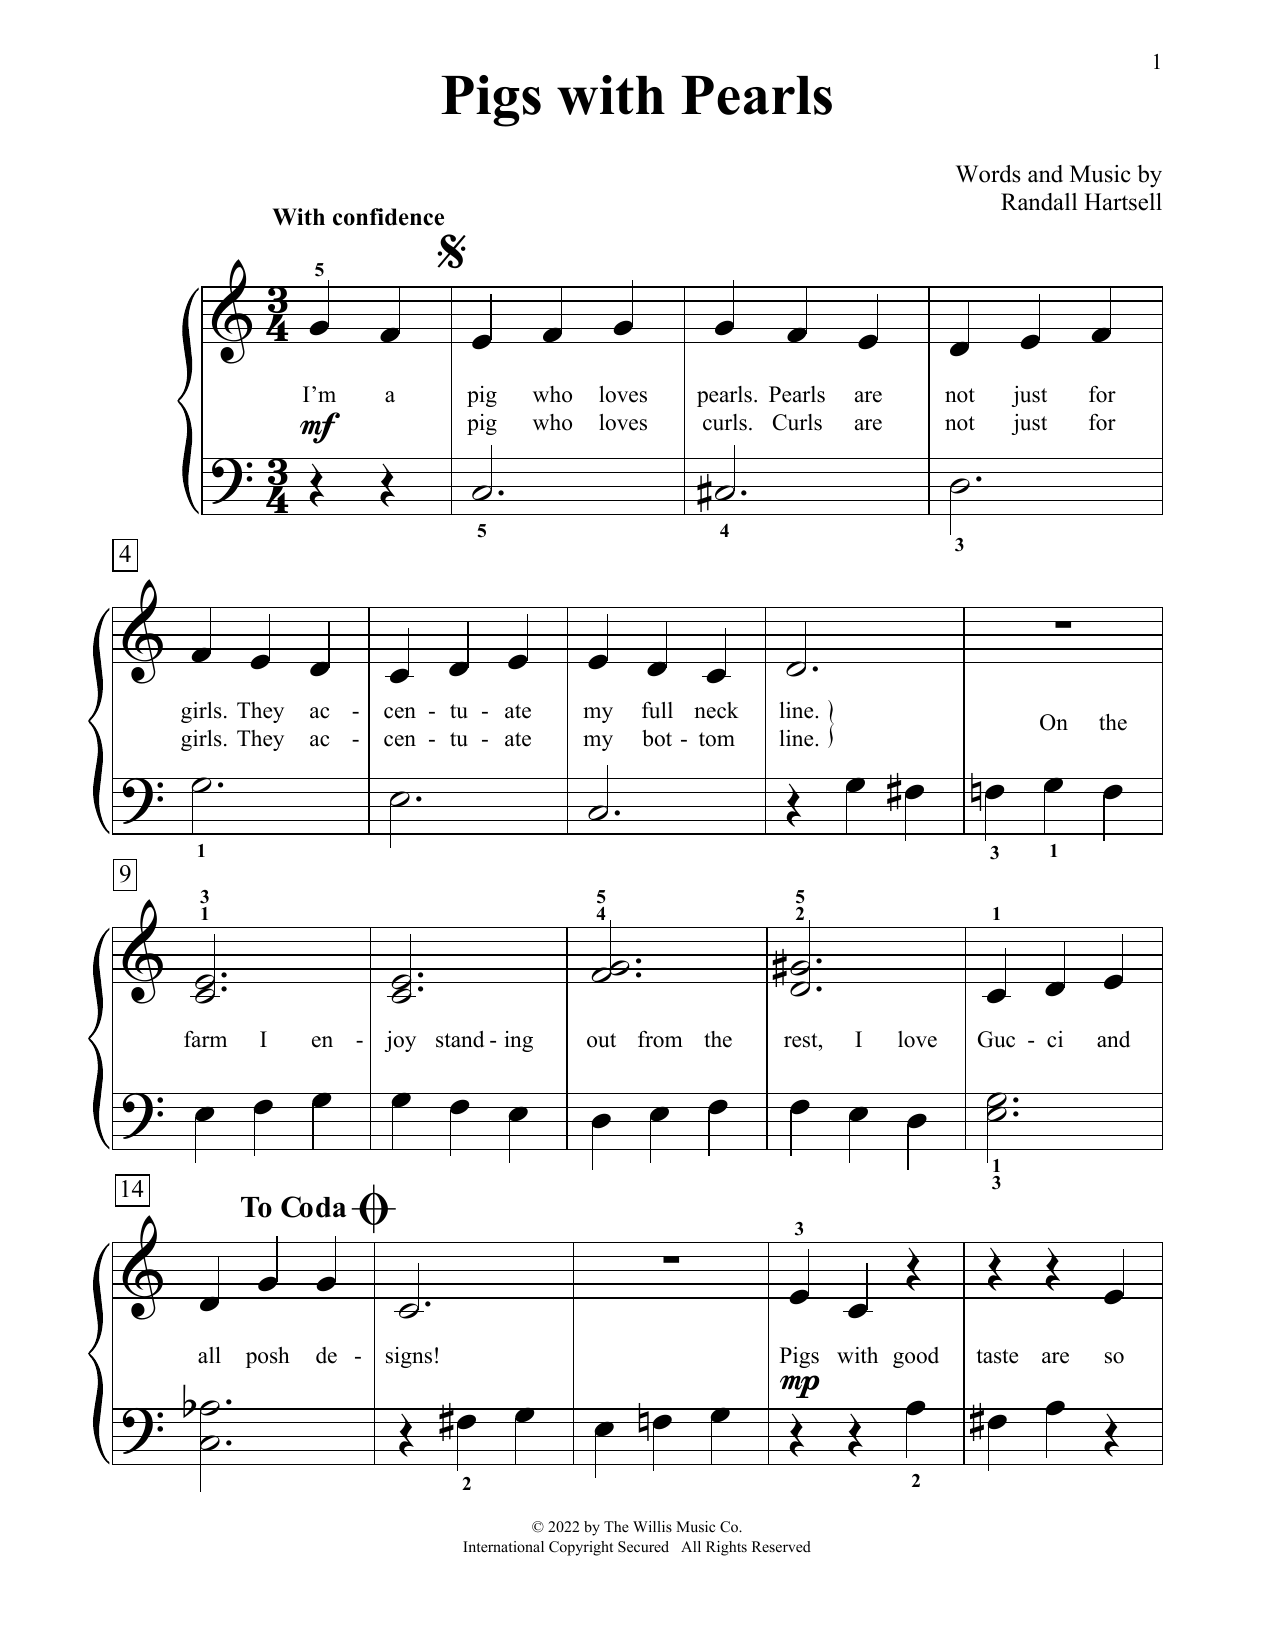 Download Randall Hartsell Pigs With Pearls Sheet Music